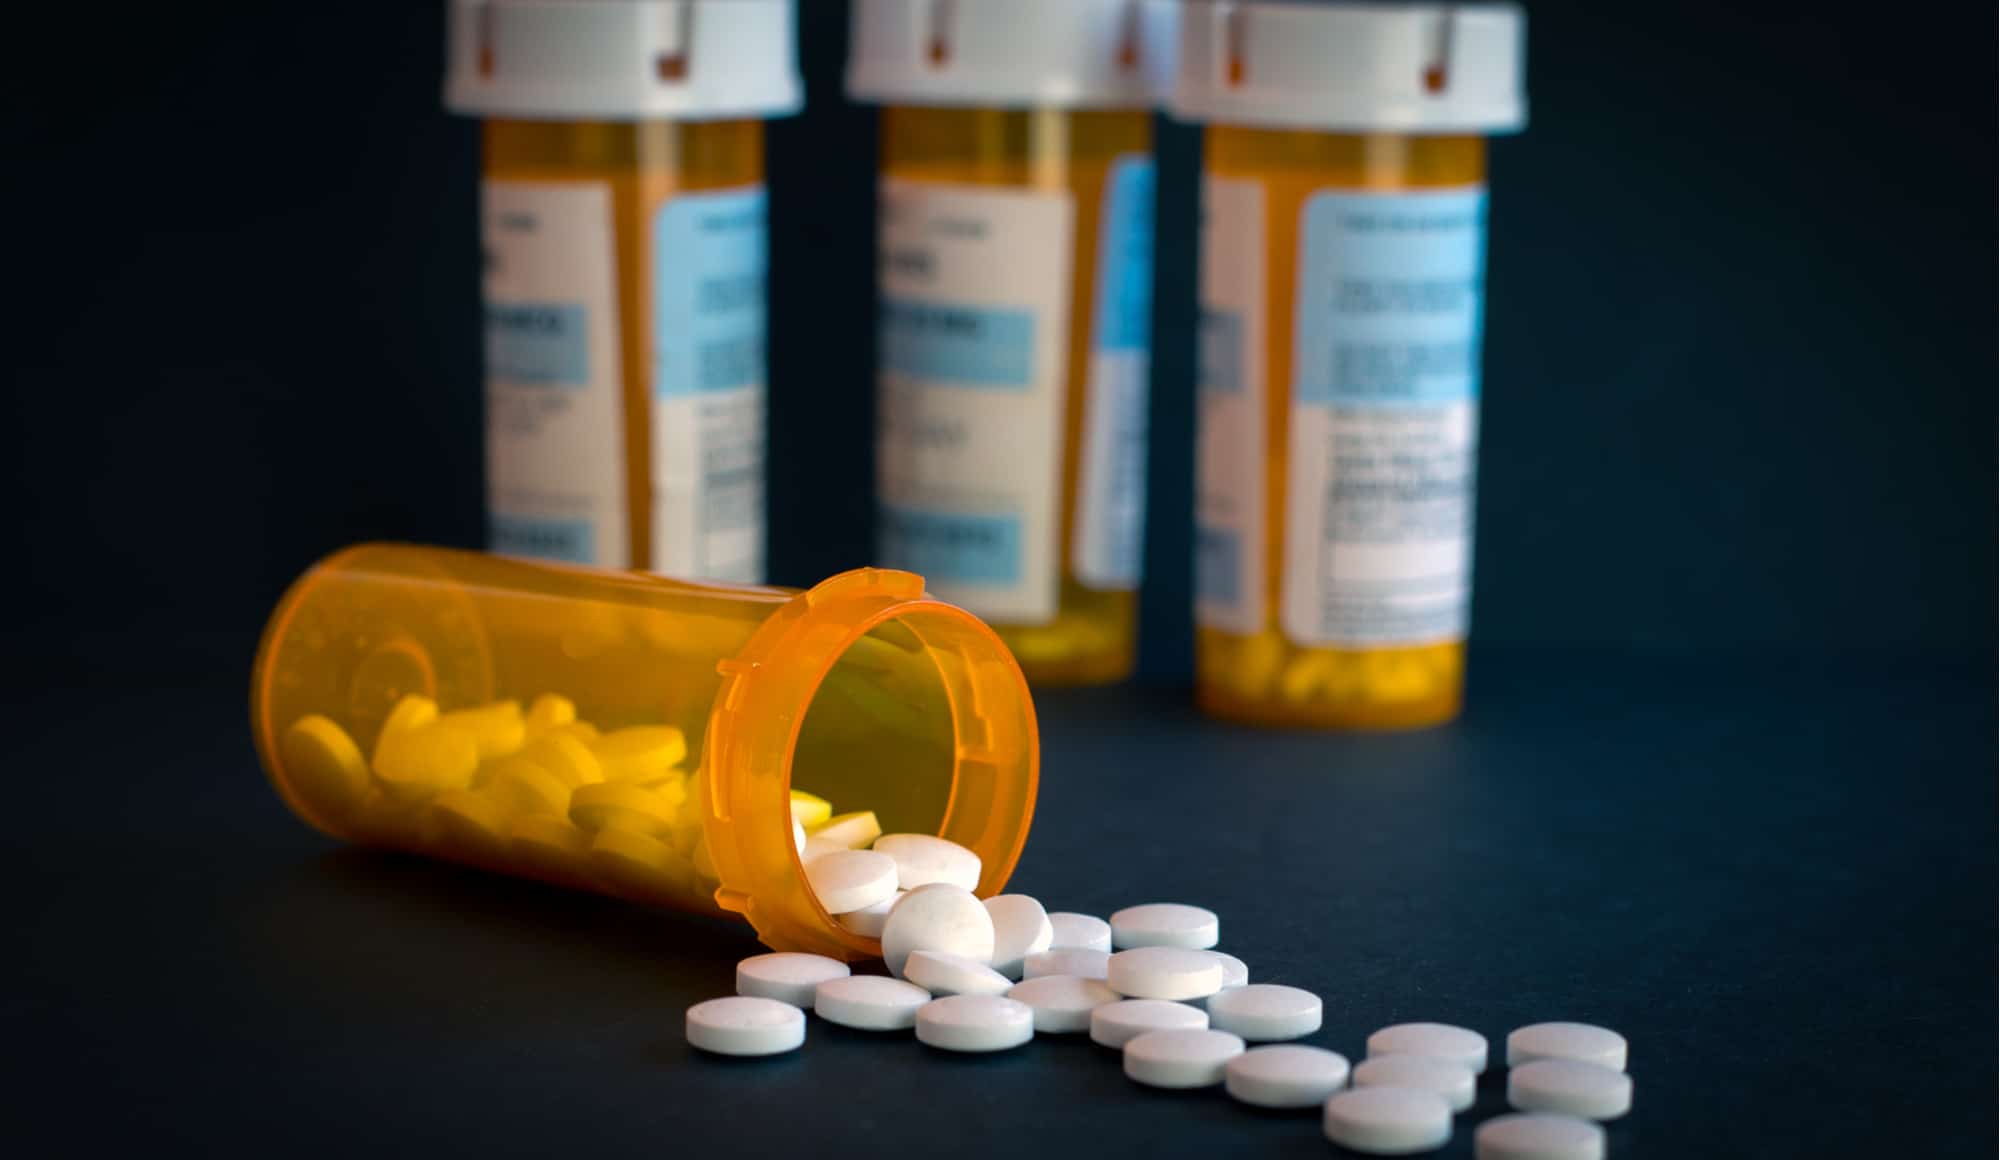 Opioid Alternatives: How to Find Pain Medications That Aren't Addictive Pathfinders - An image of a prescription of opioids that are highly addictive and can lead to opioid abuse and addiction, which is why it is recommended to seek out opioid alternatives for pain relief.